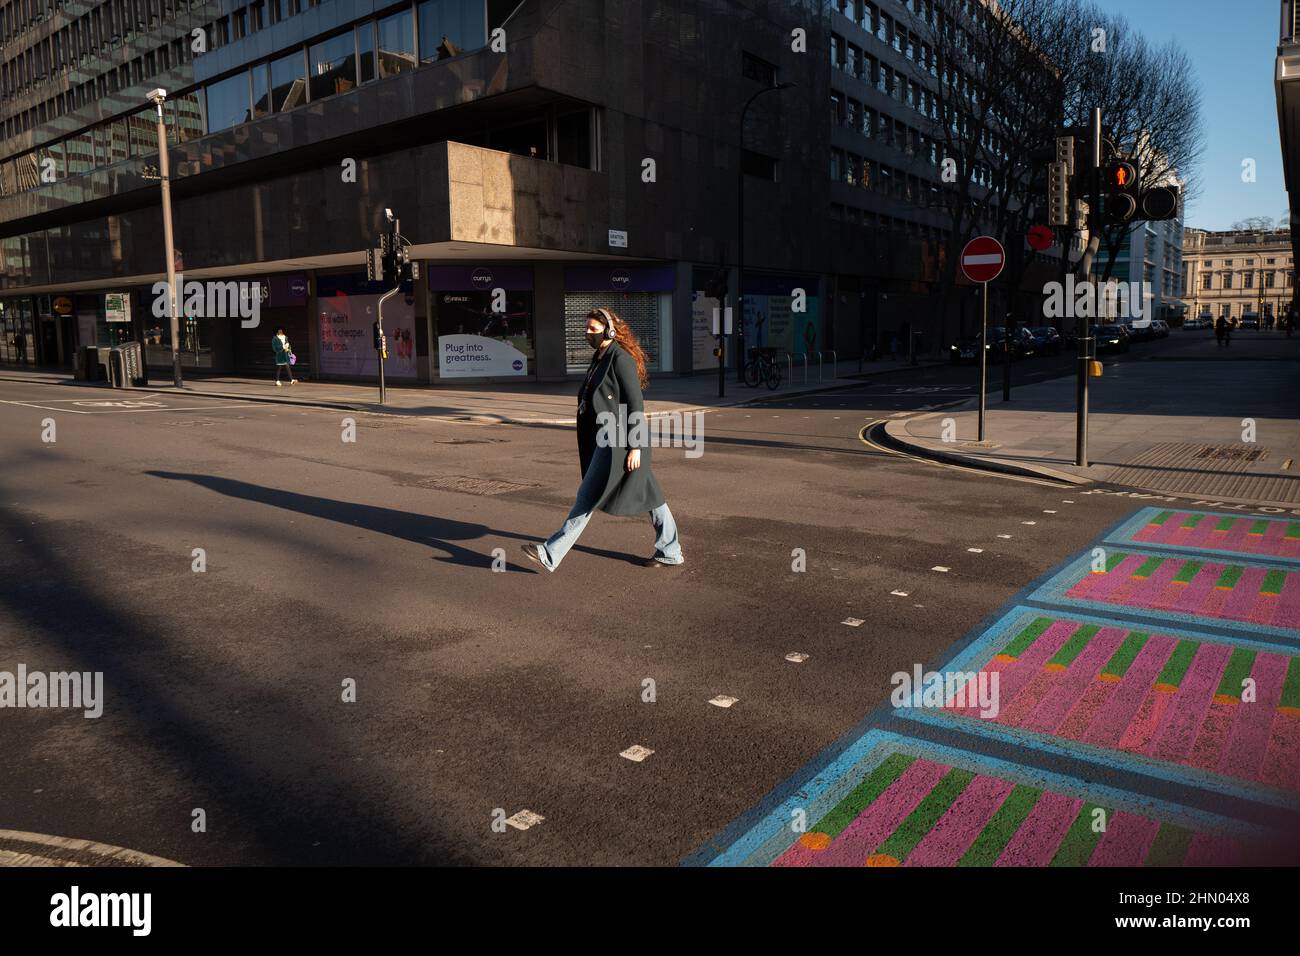 Woman with long flowing hair crosses Tottenham Court Road, London on a bright but chilly winters day. Stock Photo